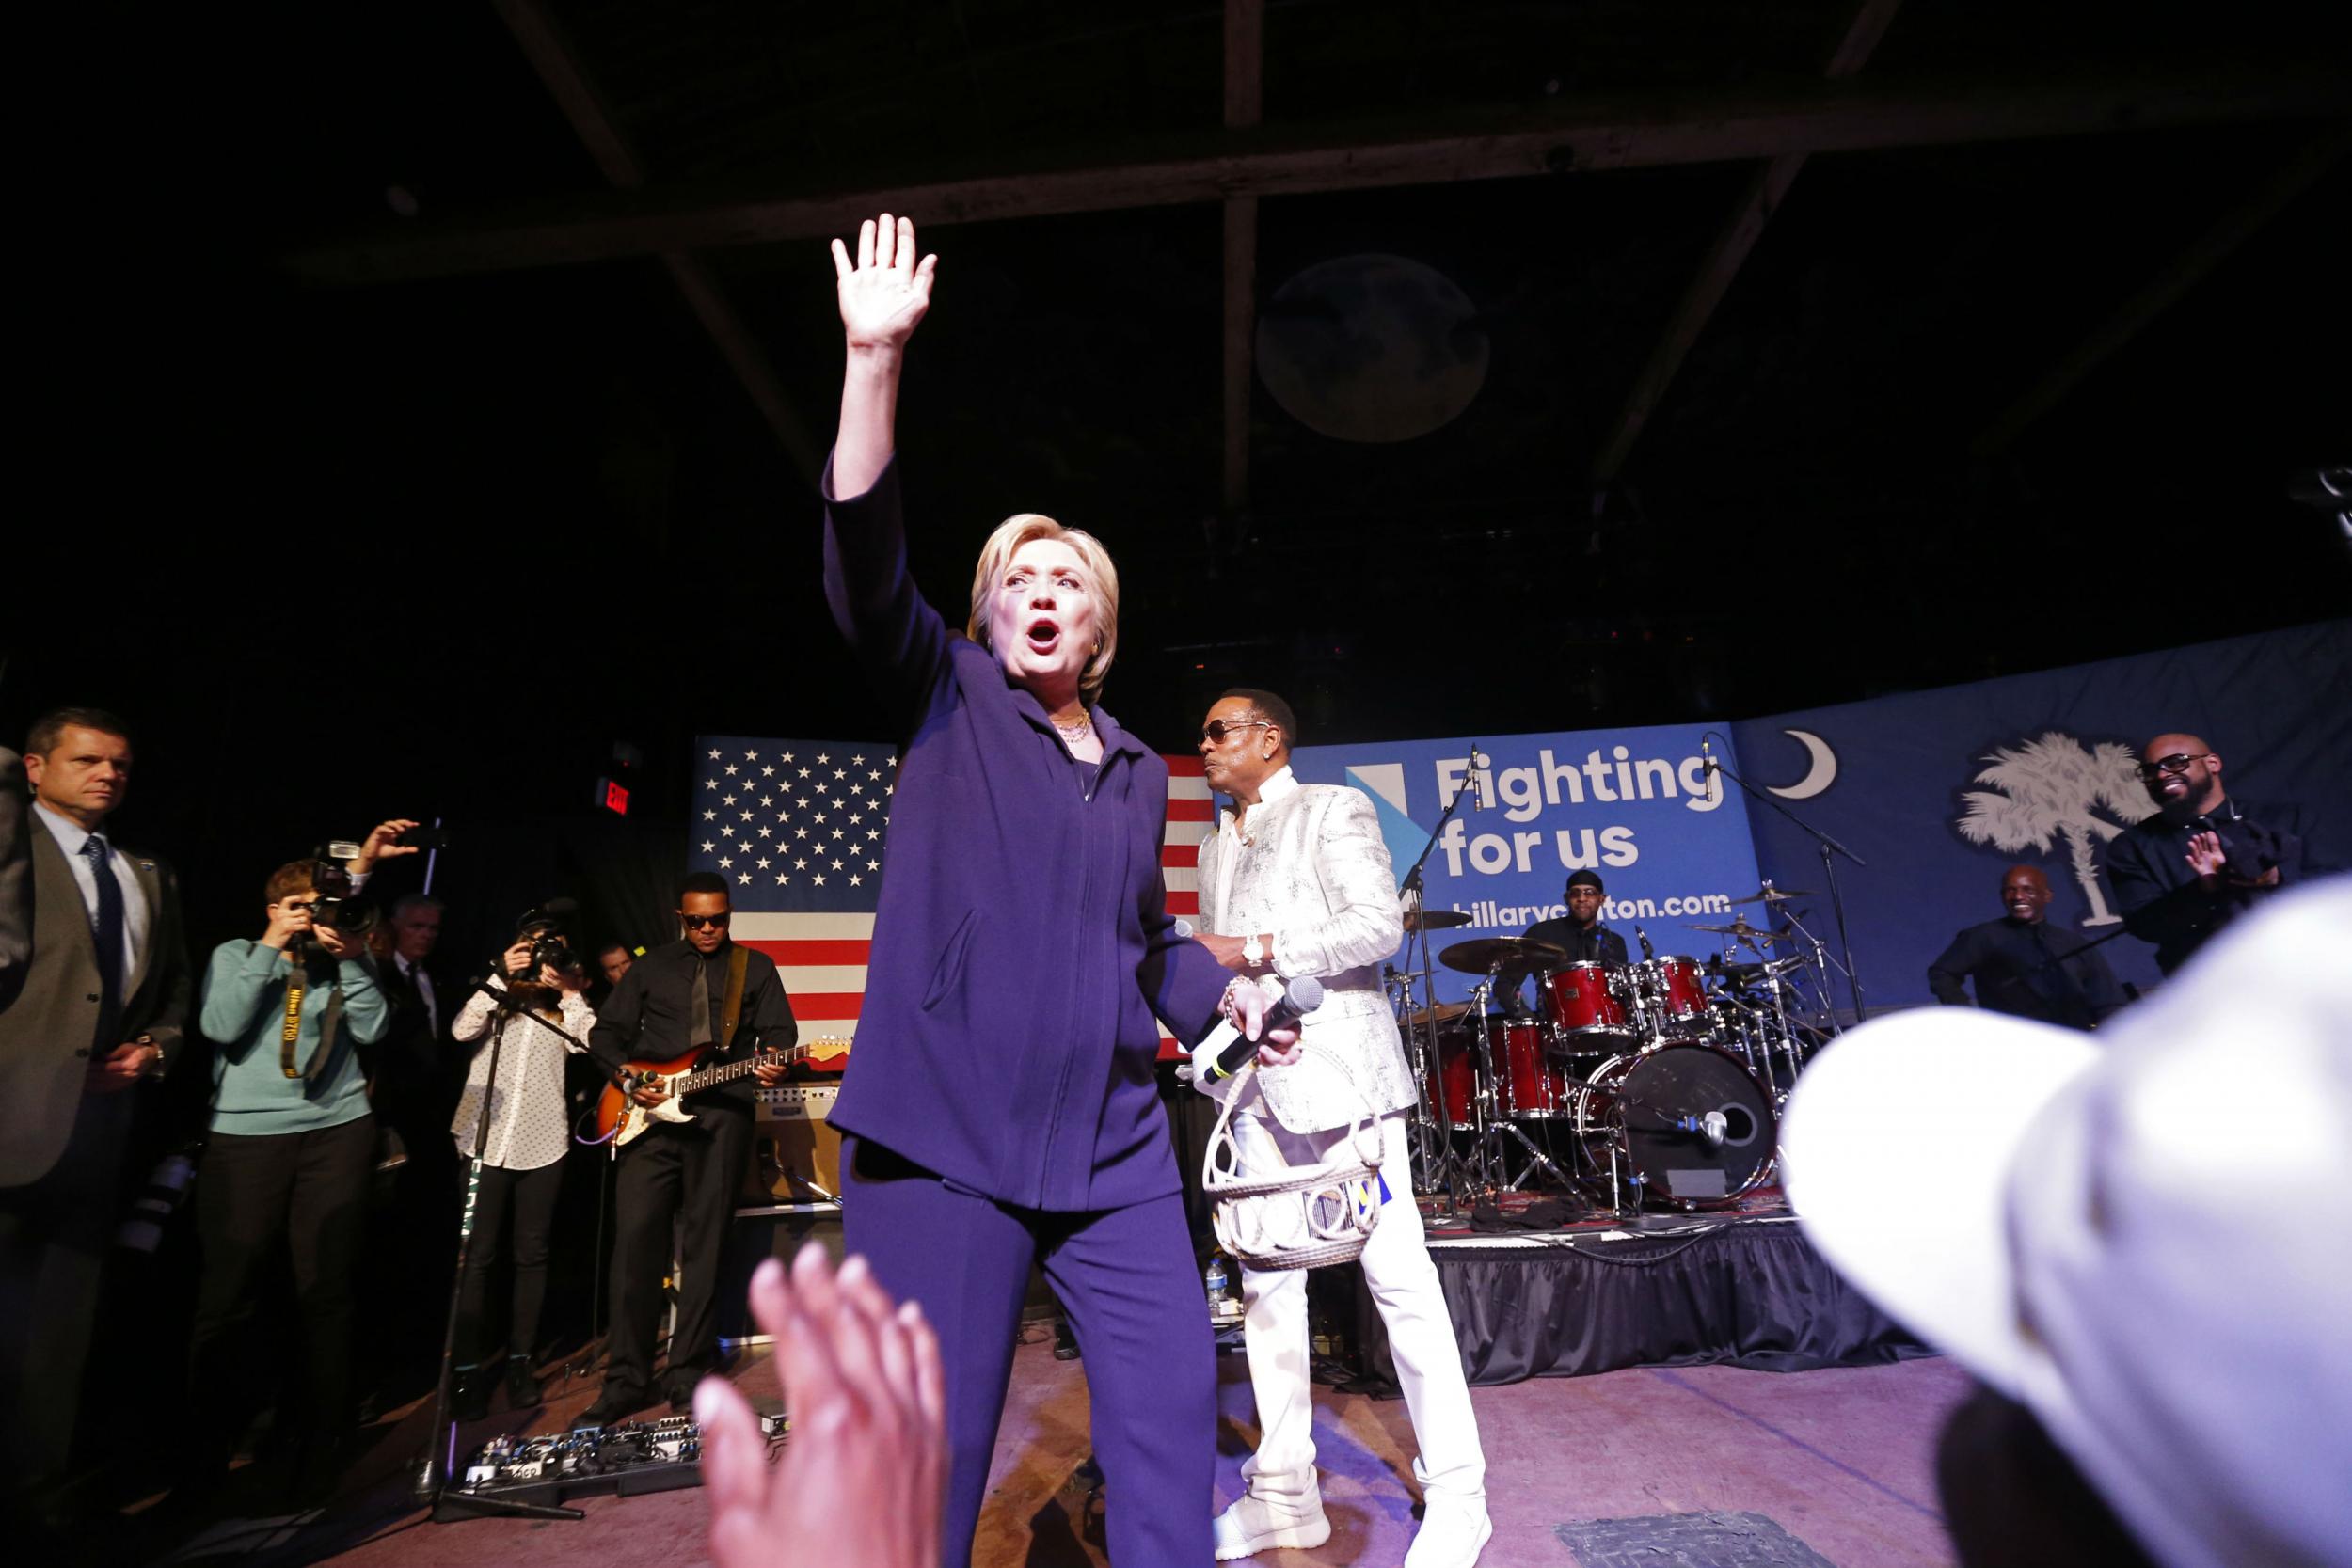 Hillary Clinton made a final appeal to voters on Thursday night in North Charleston